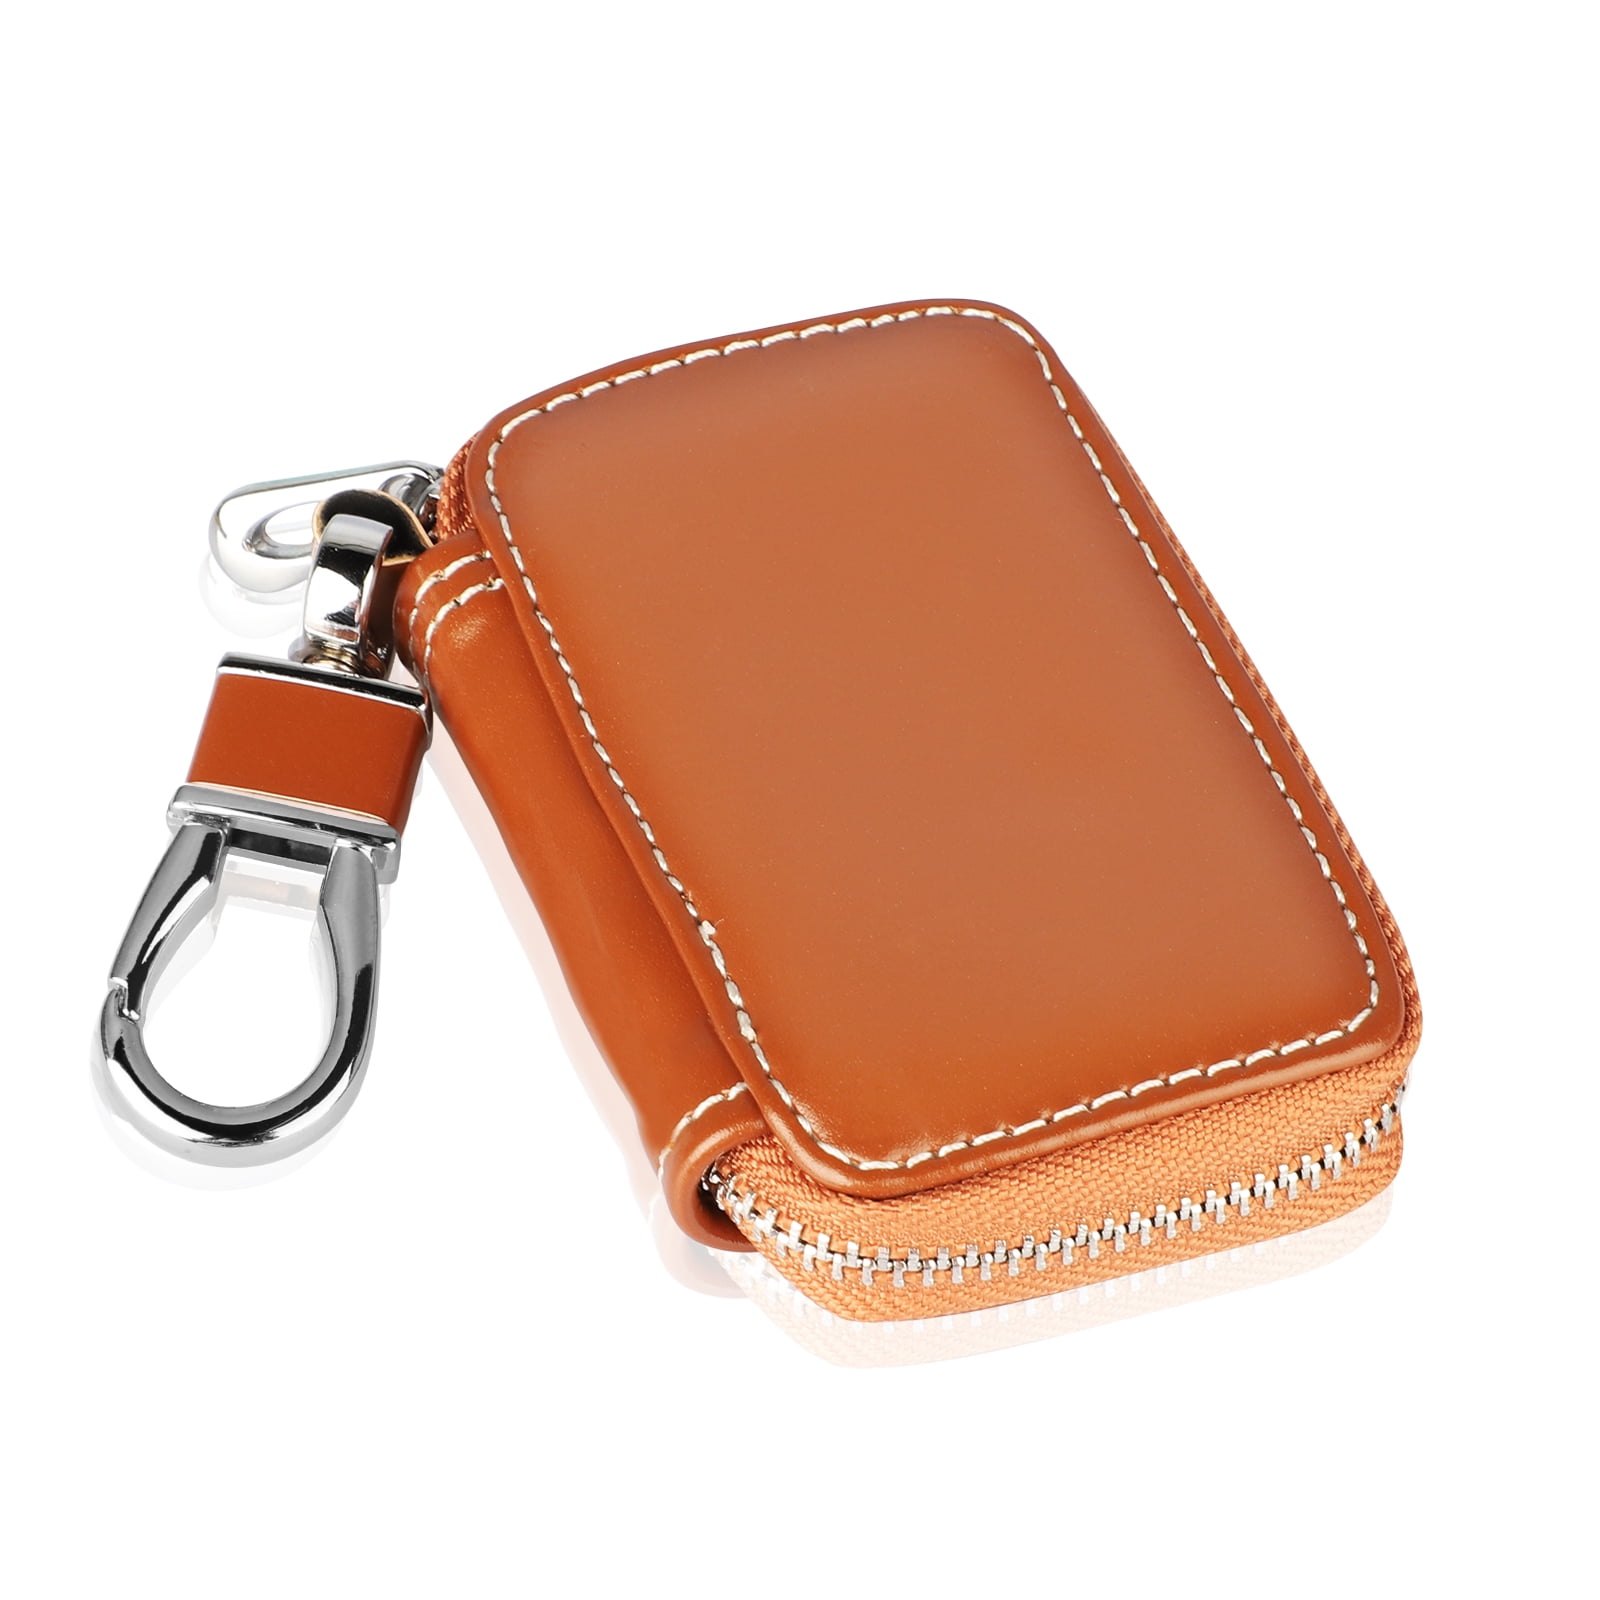 TSV Car Key Leather Case, Universal Leather Key Fob Cover Case, Metal ...